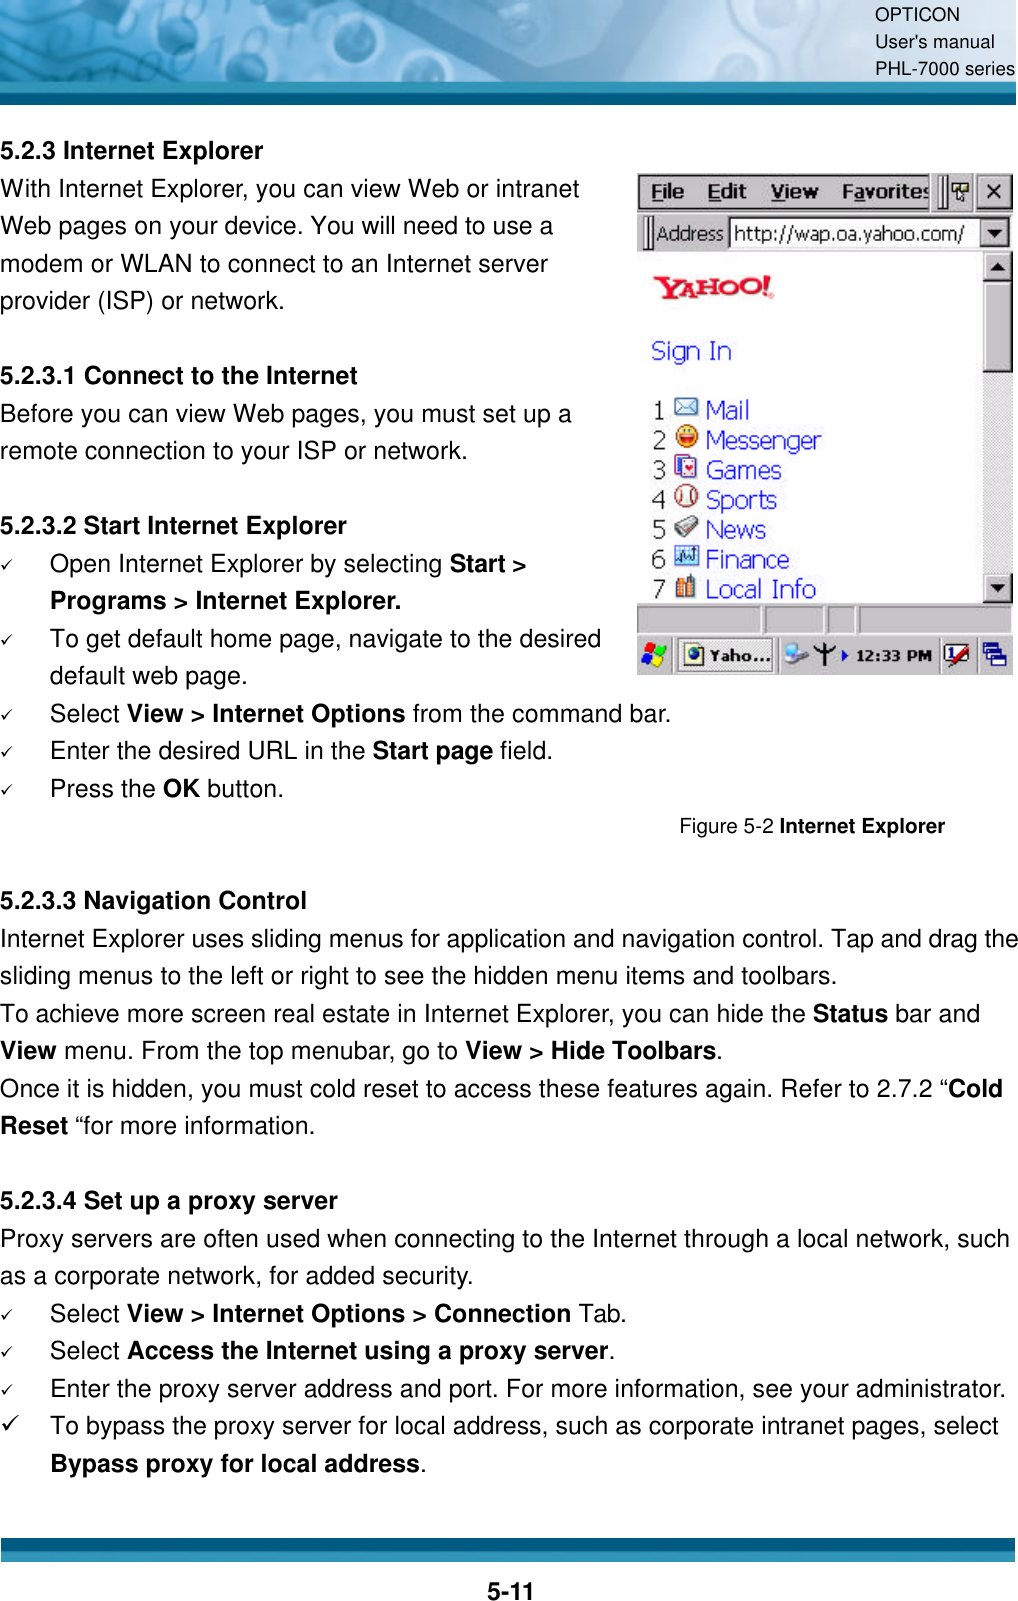 OPTICON User&apos;s manual PHL-7000 series    5-11 5.2.3 Internet Explorer With Internet Explorer, you can view Web or intranet Web pages on your device. You will need to use a modem or WLAN to connect to an Internet server provider (ISP) or network.  5.2.3.1 Connect to the Internet Before you can view Web pages, you must set up a remote connection to your ISP or network.  5.2.3.2 Start Internet Explorer ü Open Internet Explorer by selecting Start &gt; Programs &gt; Internet Explorer. ü To get default home page, navigate to the desired default web page. ü Select View &gt; Internet Options from the command bar. ü Enter the desired URL in the Start page field. ü Press the OK button. Figure 5-2 Internet Explorer  5.2.3.3 Navigation Control Internet Explorer uses sliding menus for application and navigation control. Tap and drag the sliding menus to the left or right to see the hidden menu items and toolbars. To achieve more screen real estate in Internet Explorer, you can hide the Status bar and View menu. From the top menubar, go to View &gt; Hide Toolbars. Once it is hidden, you must cold reset to access these features again. Refer to 2.7.2 “Cold Reset “for more information.  5.2.3.4 Set up a proxy server Proxy servers are often used when connecting to the Internet through a local network, such as a corporate network, for added security. ü Select View &gt; Internet Options &gt; Connection Tab. ü Select Access the Internet using a proxy server. ü Enter the proxy server address and port. For more information, see your administrator. ü To bypass the proxy server for local address, such as corporate intranet pages, select Bypass proxy for local address.  